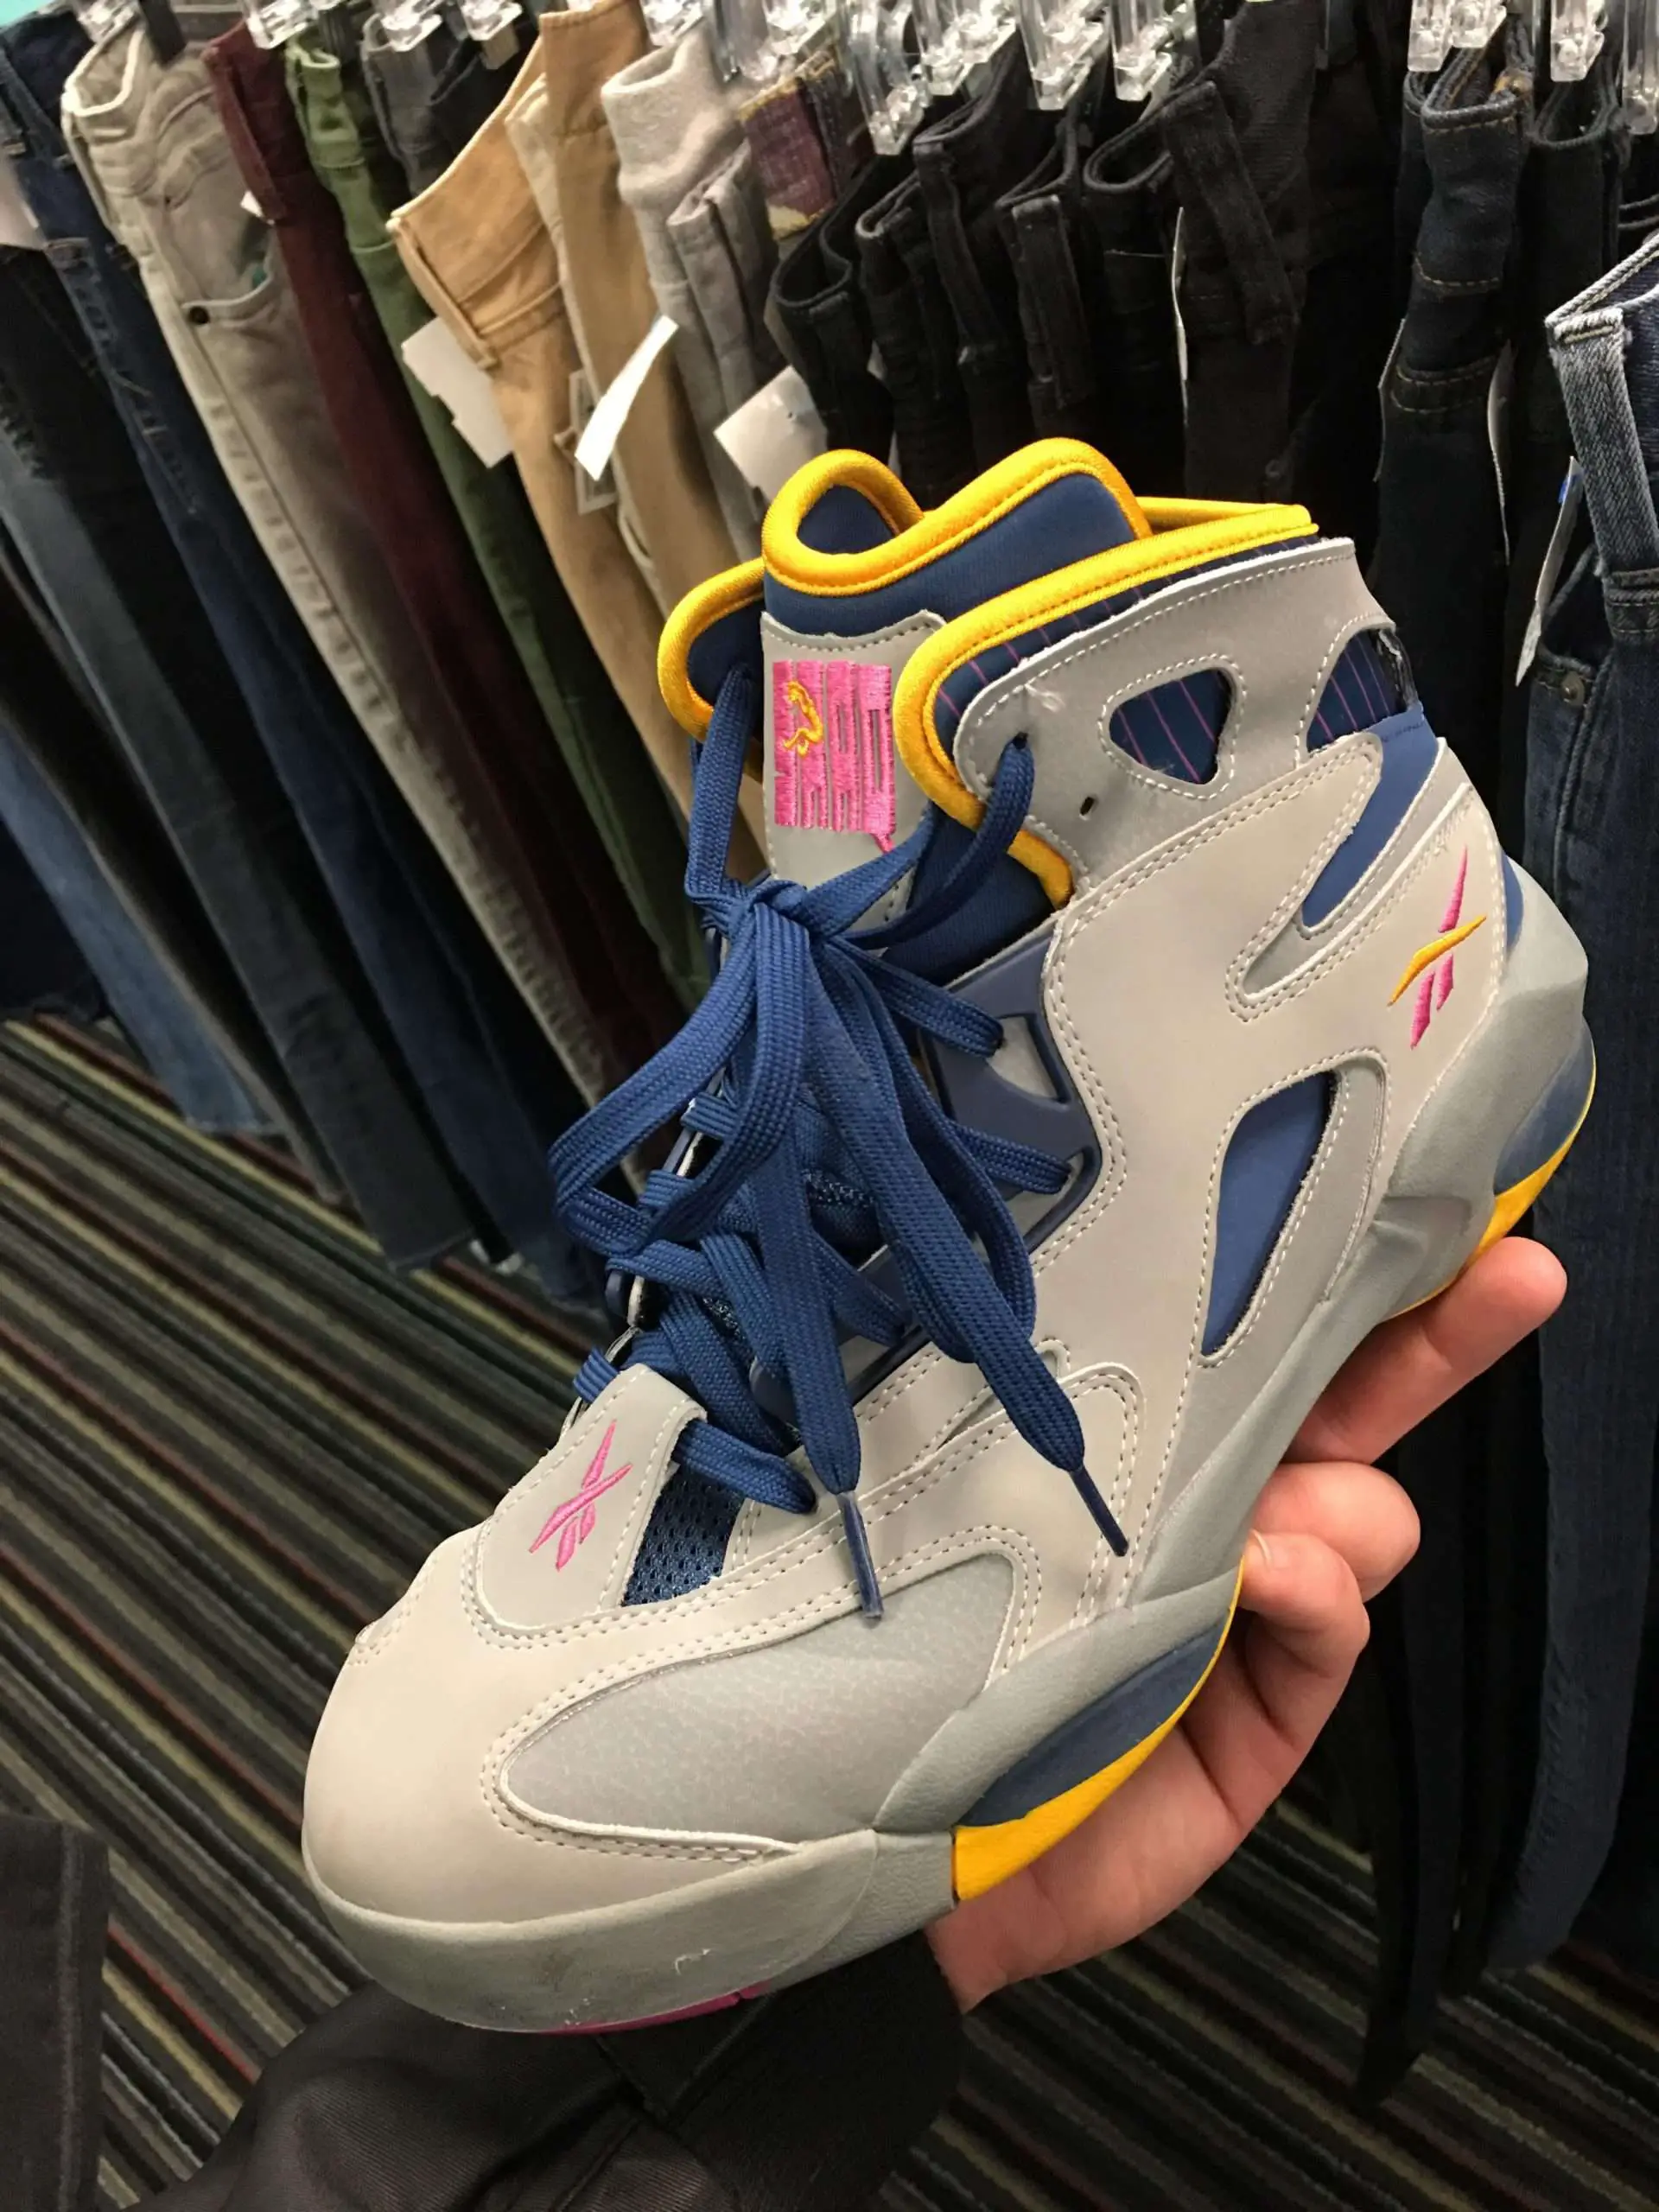 Any info on these Reebok Shaq shoes? I cant find anything ...